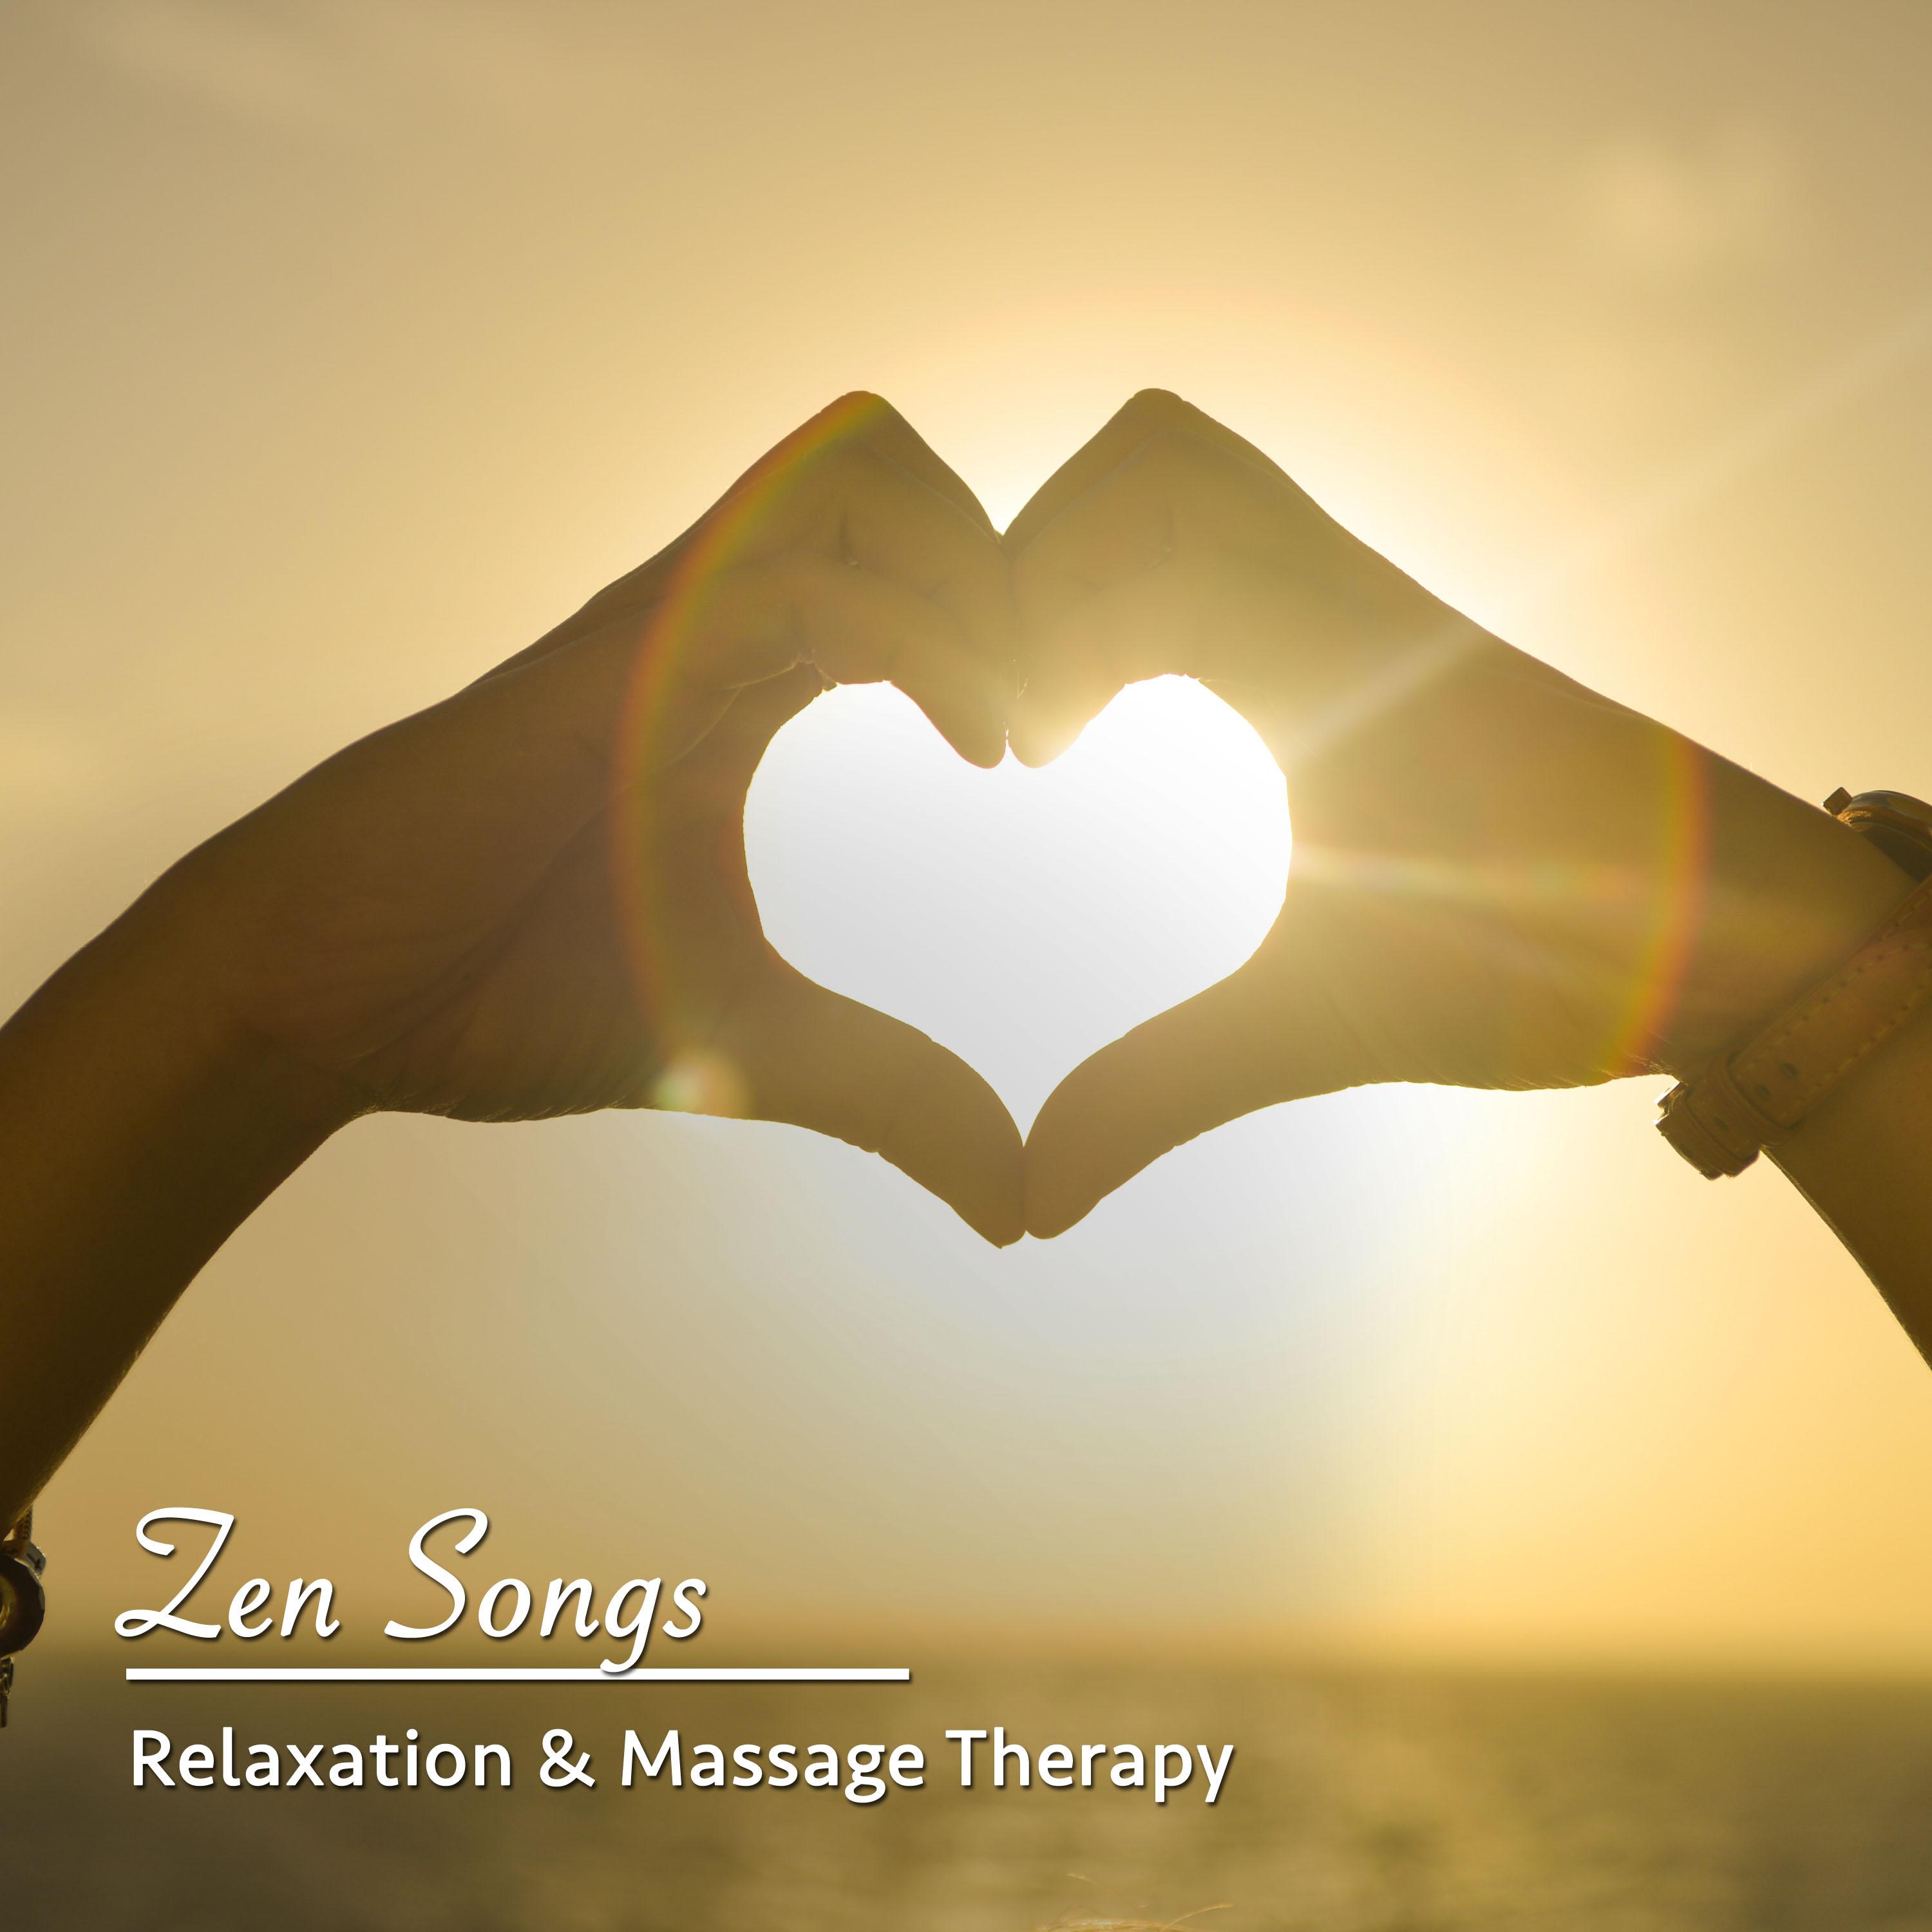 12 Zen Songs for Relaxation and Massage Therapy